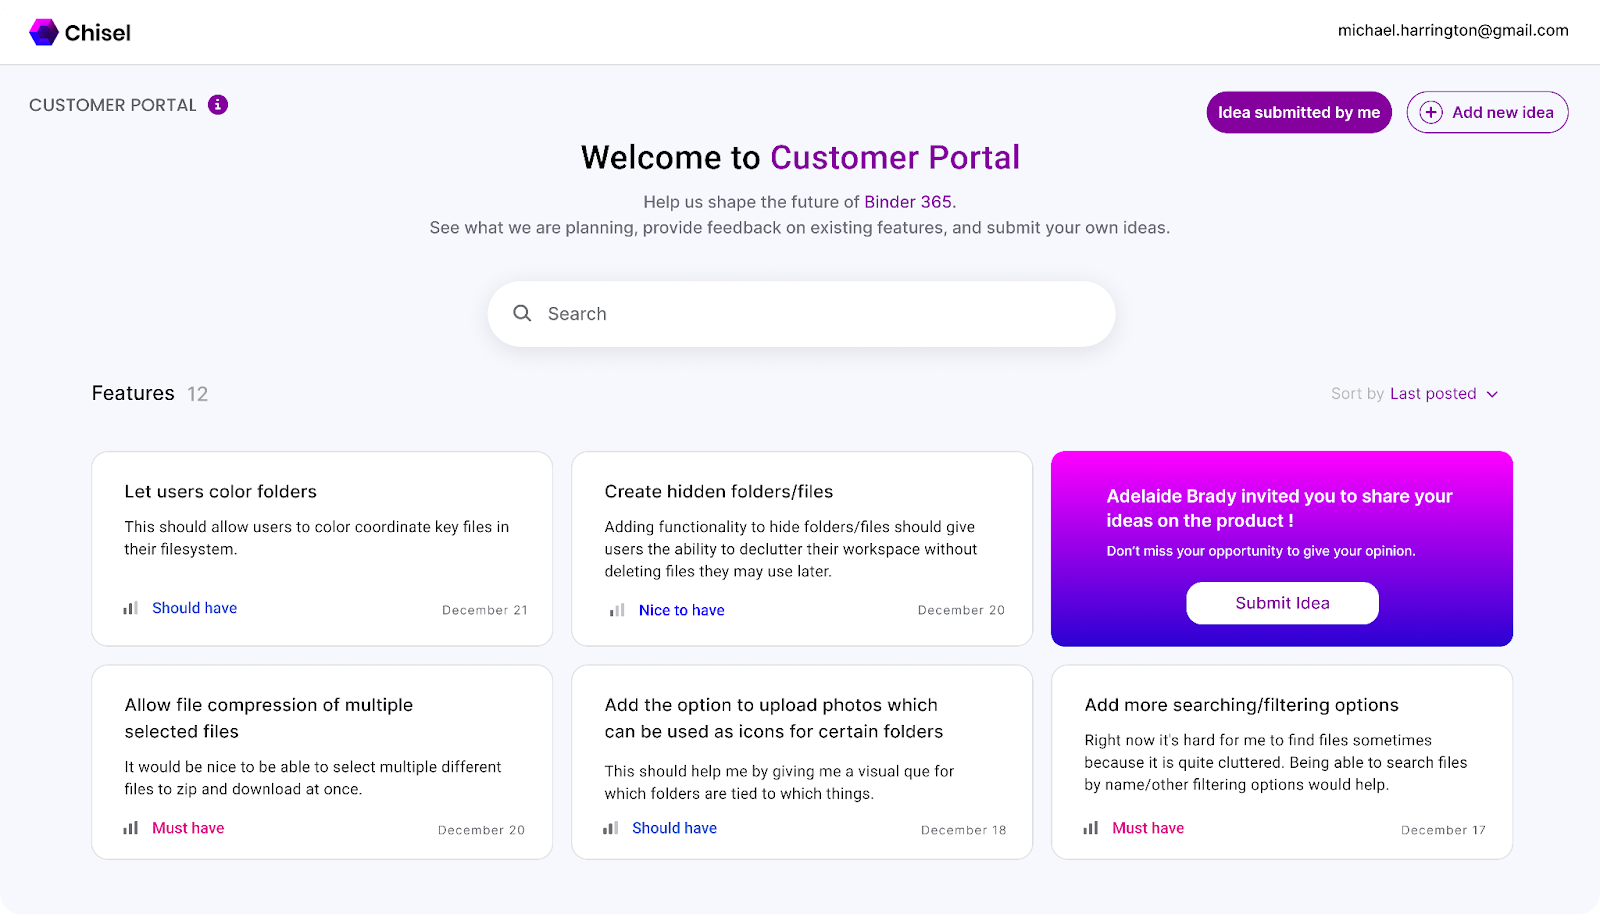 Chisel’s feedback portal enables customers to easily share, store, and prioritize their ideas by following a simple link.